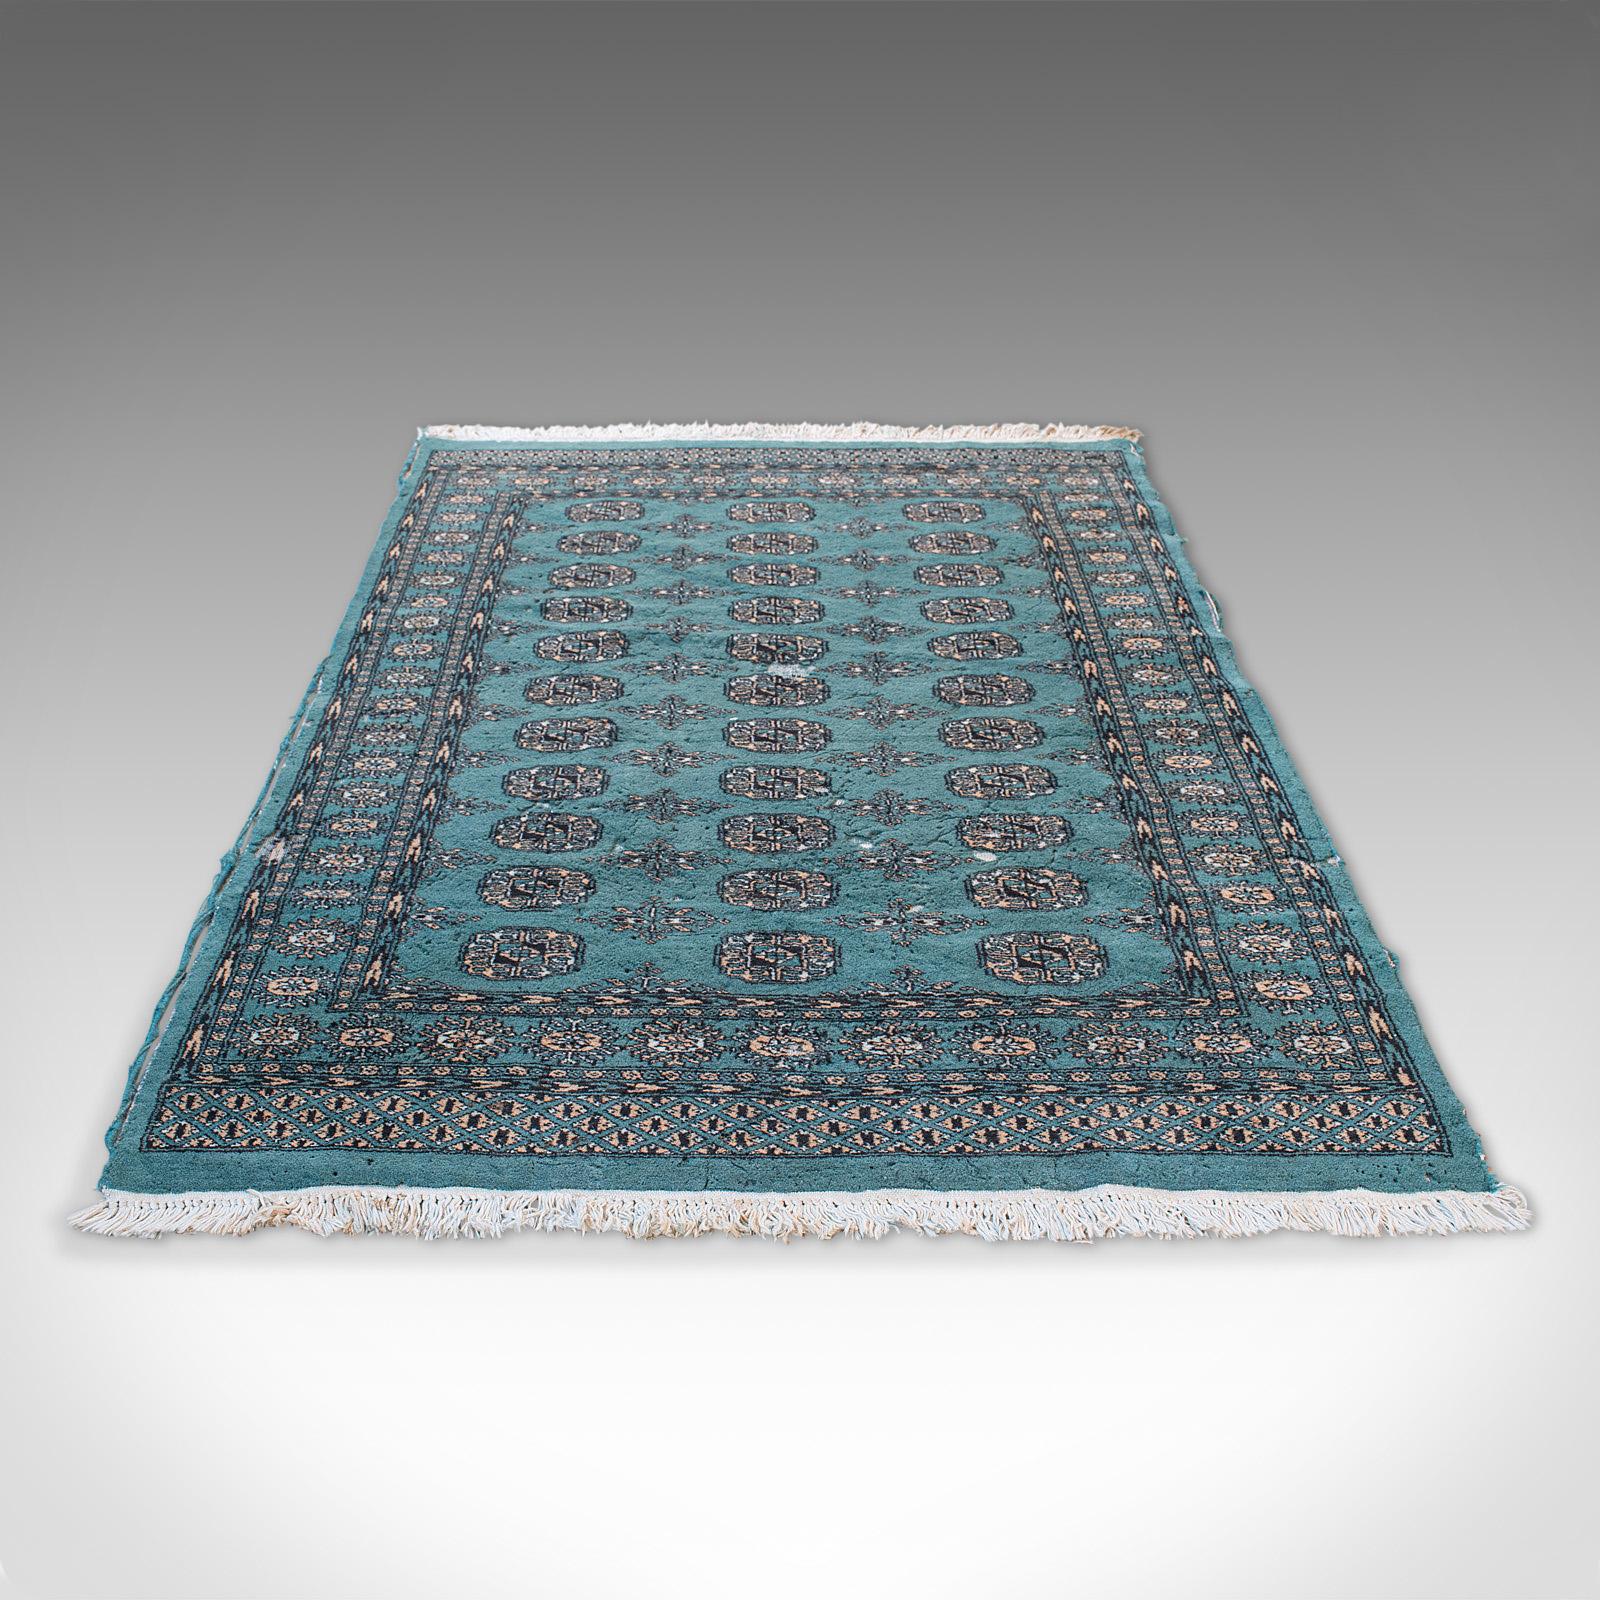 This is a vintage decorative rug. A Middle Eastern, woollen Bokhara carpet, dating to the mid-20th century, circa 1950.

Superb color draws the eye to this dashing rug of Dozar size - 201cm (79.25